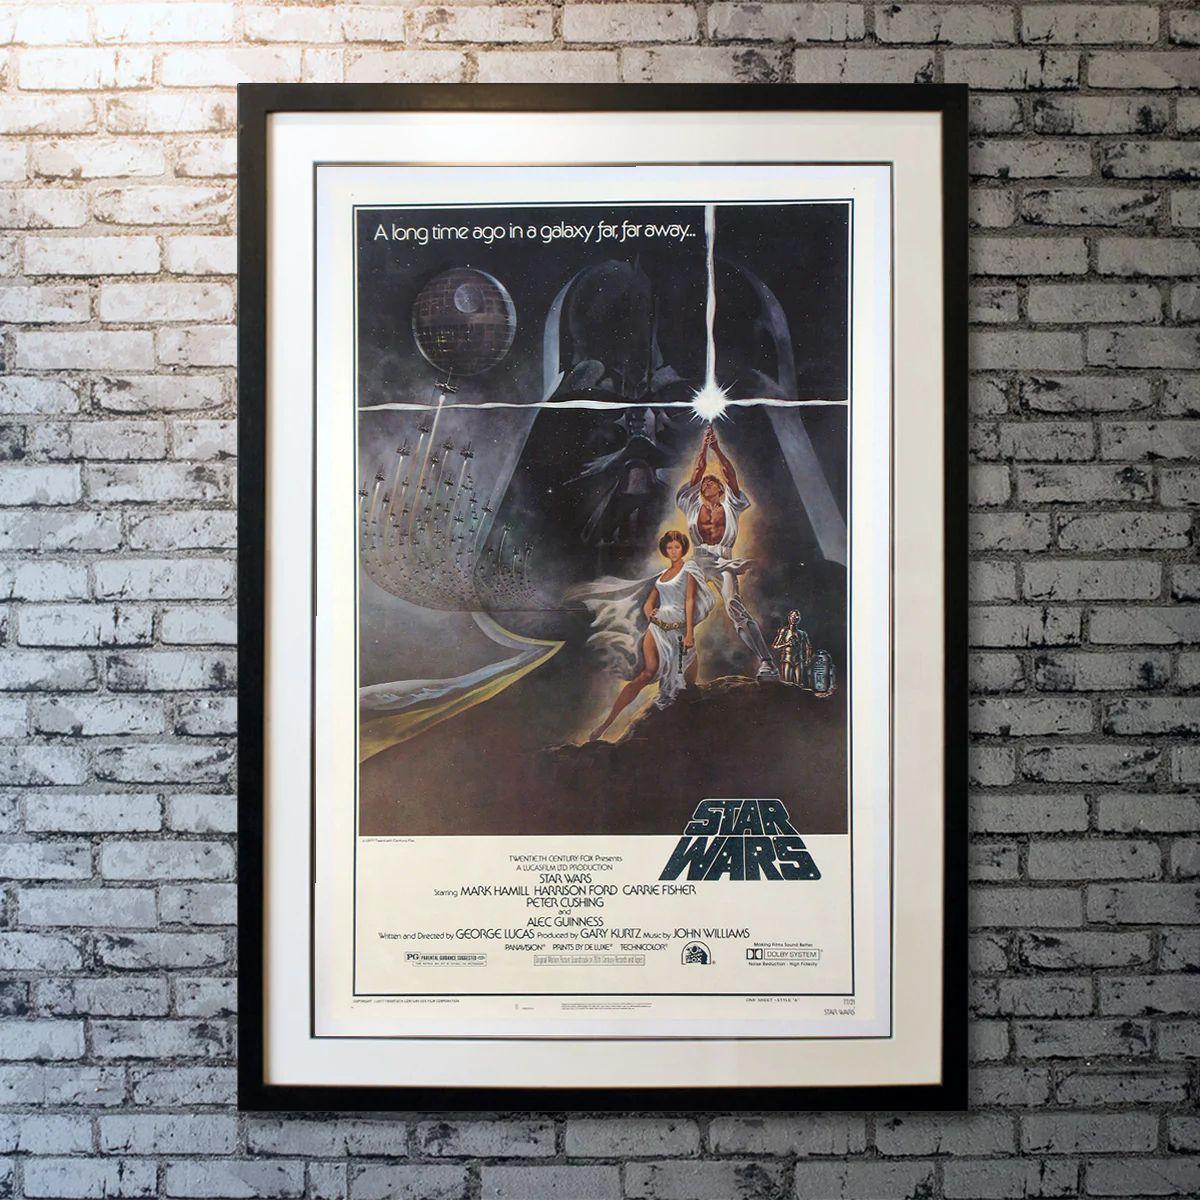 Star Wars, Unframed Poster, 1977

Luke Skywalker joins forces with a Jedi Knight, a cocky pilot, a Wookiee and two droids to save the galaxy from the Empire's world-destroying battle station, while also attempting to rescue Princess Leia from the